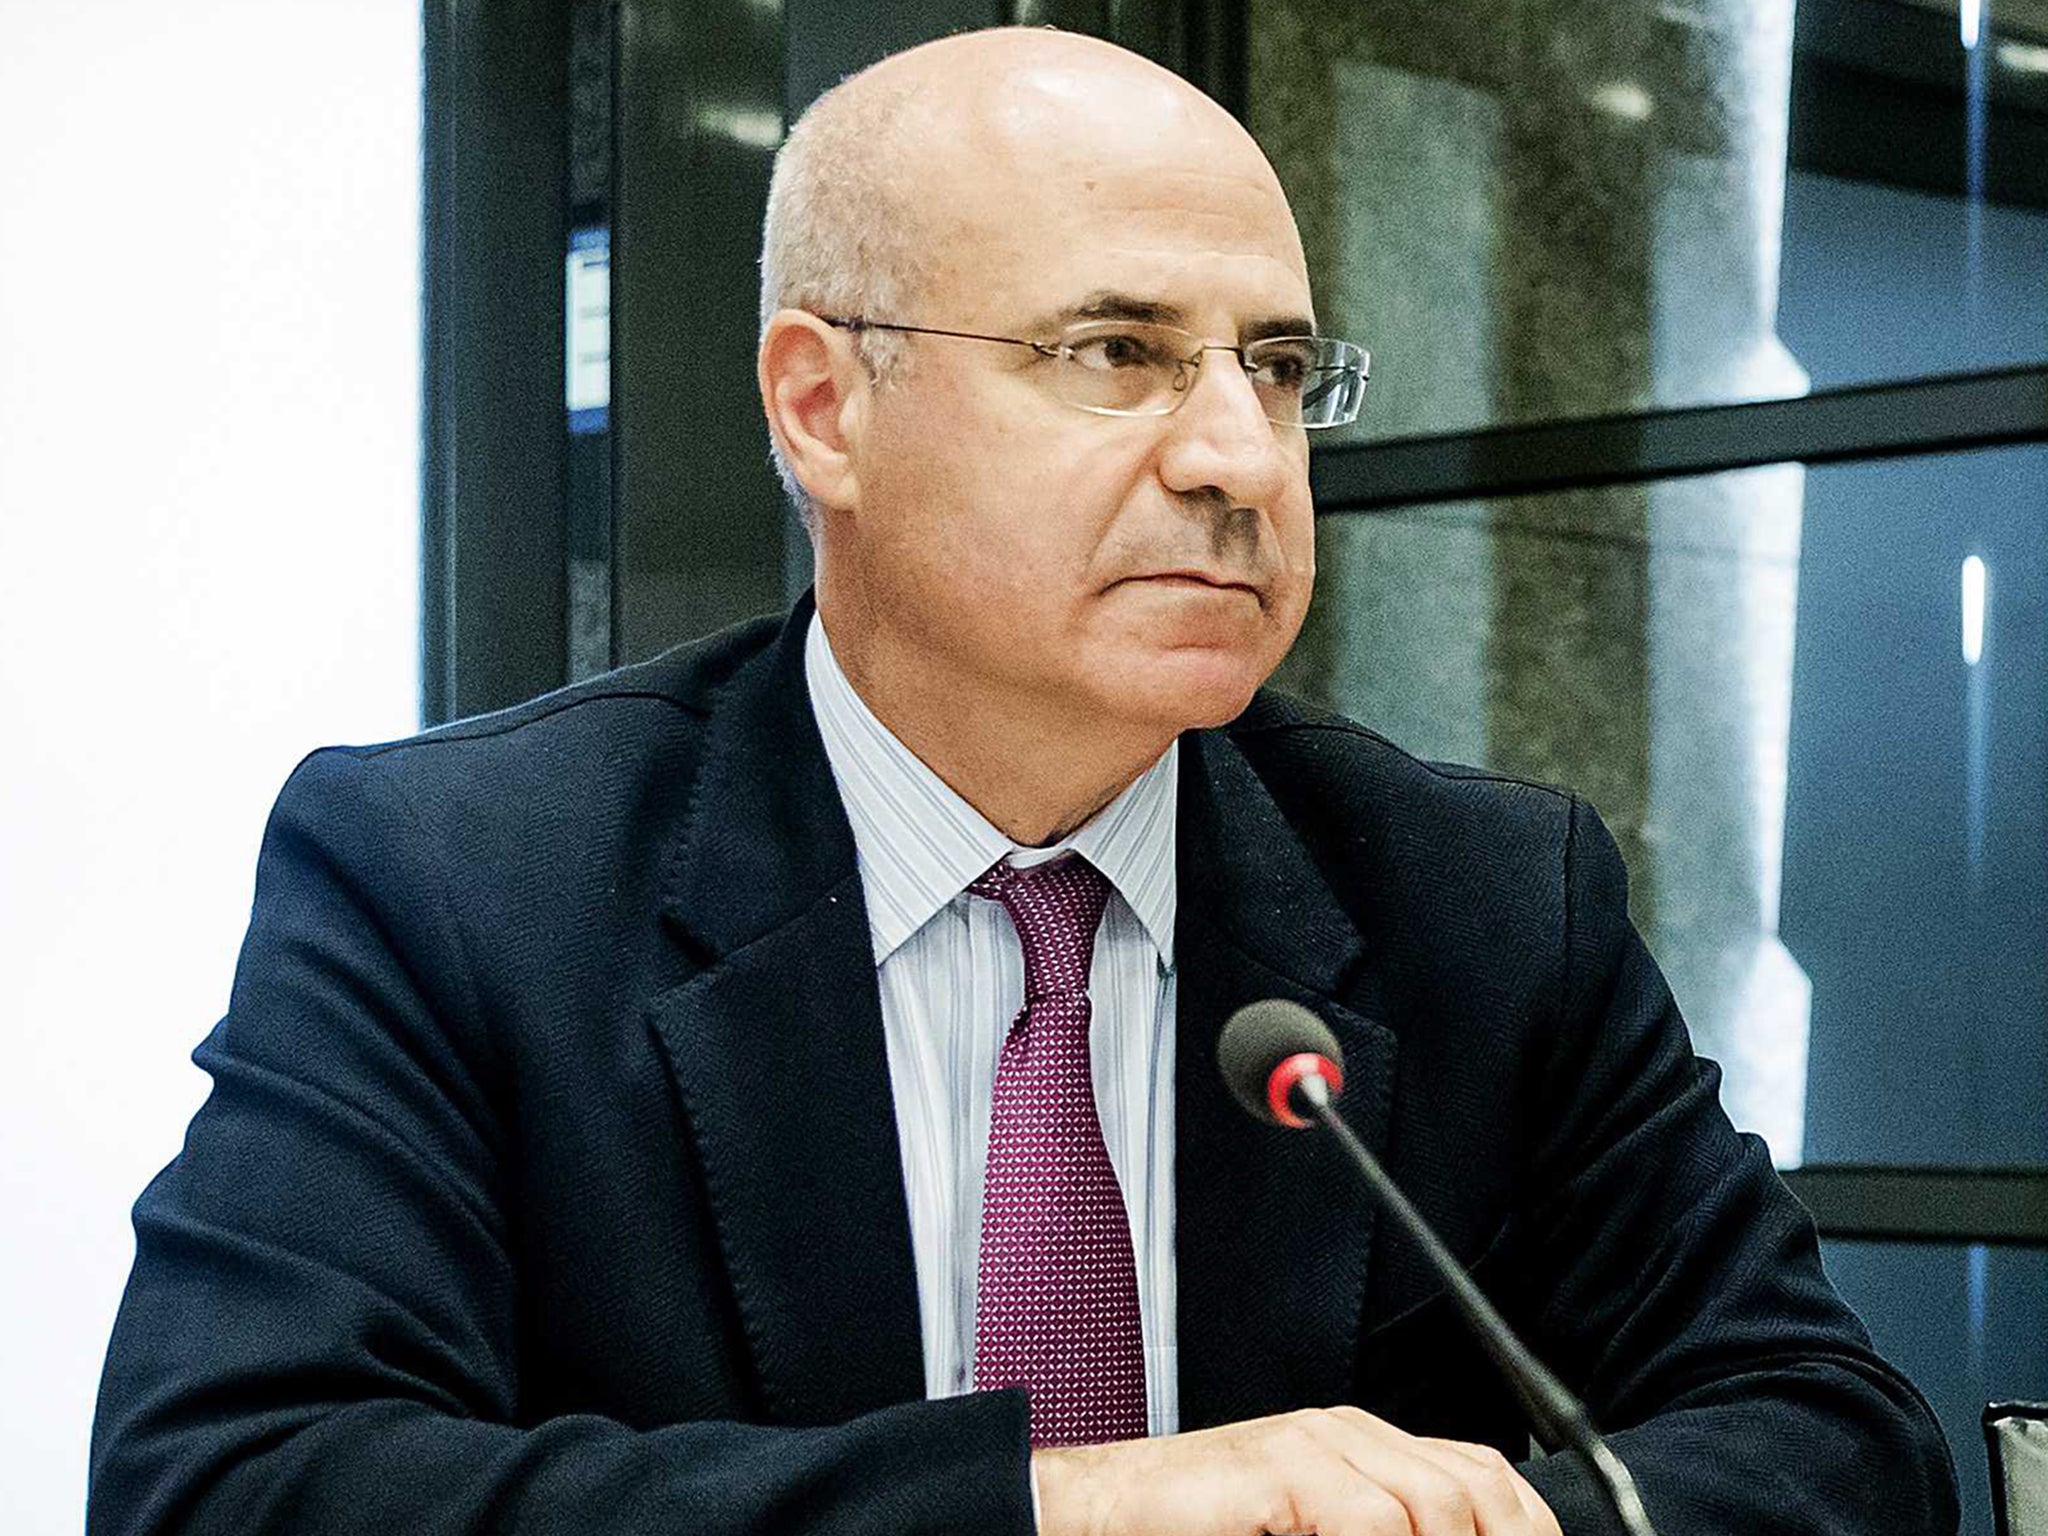 Bill Browder gave evidence to the inquiry